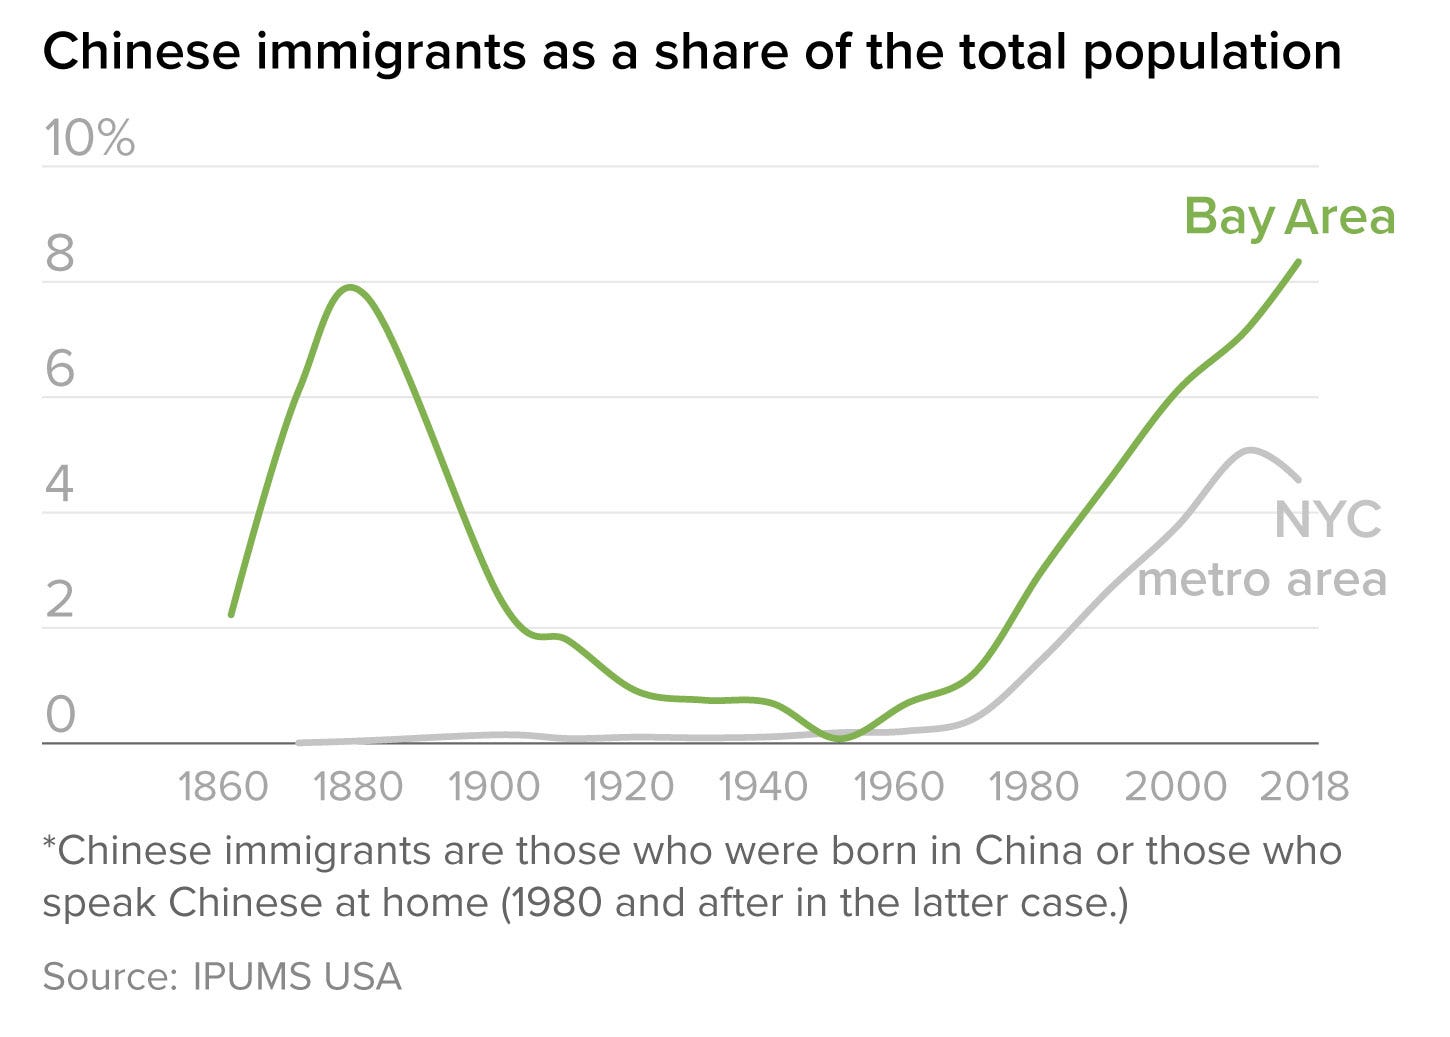 The working story of Chinese immigration to the Bay Area